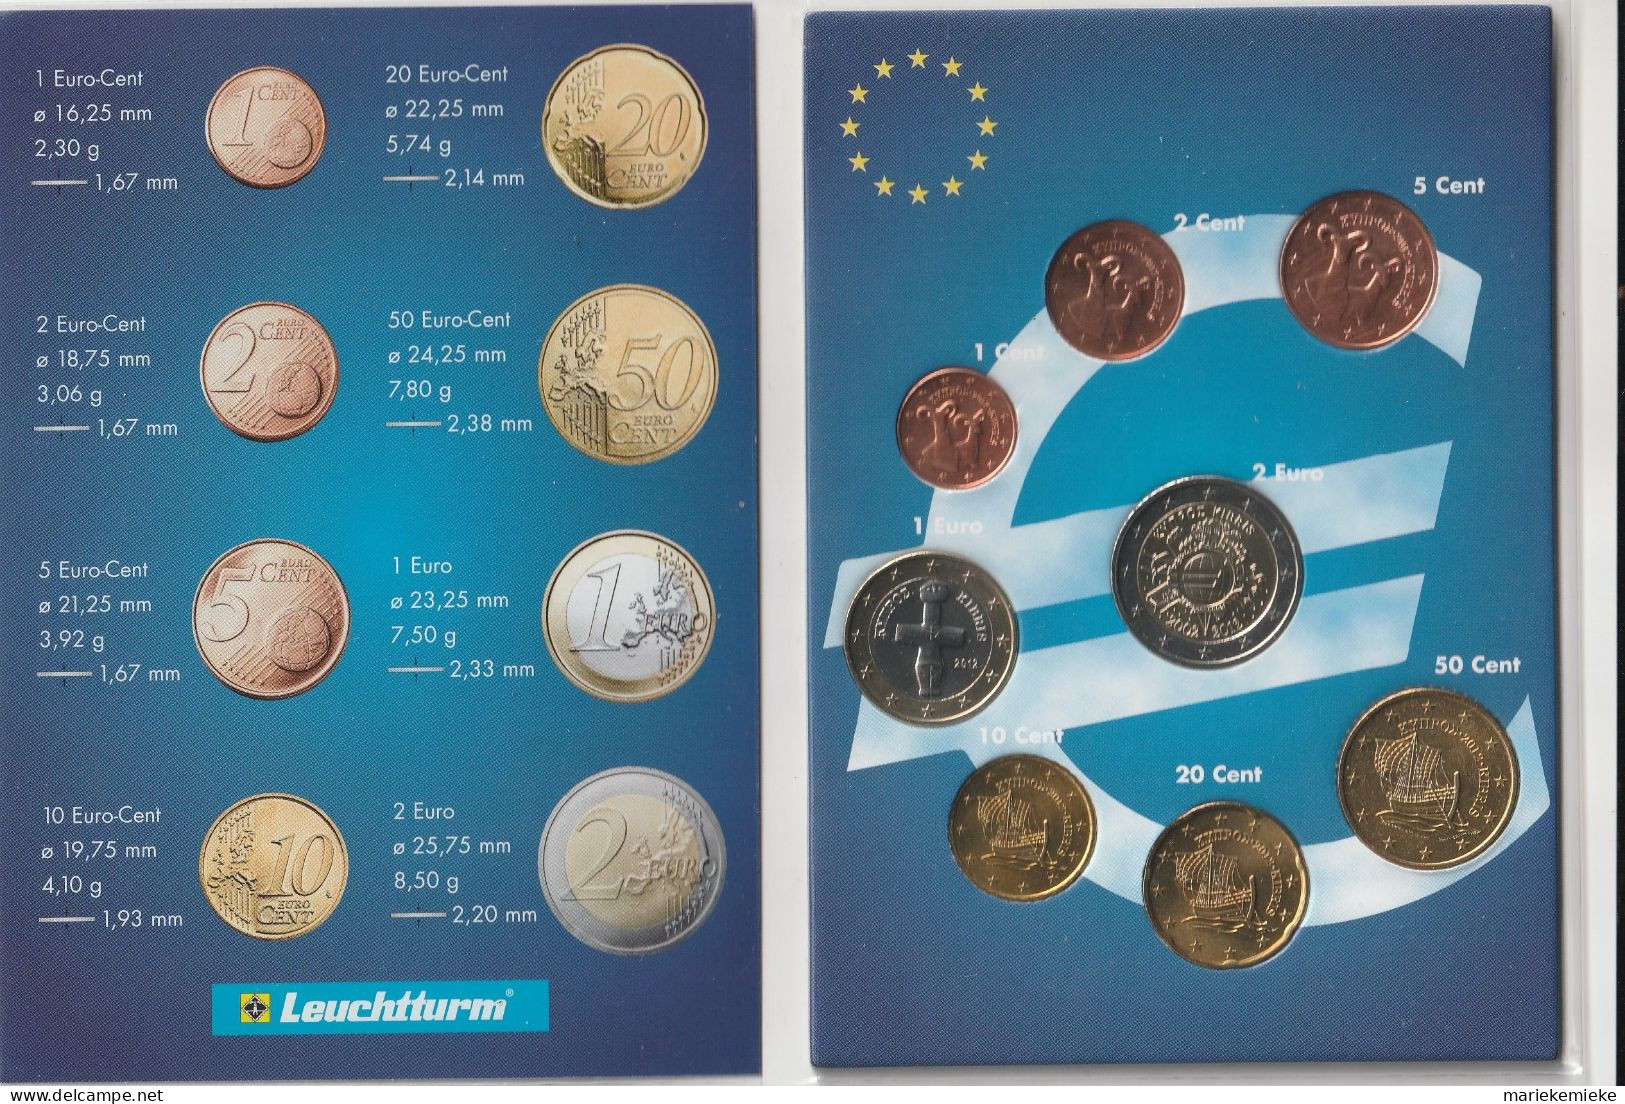 CYPRUS 2012 JAARSET UNC - FDC /  CHYPRE 2012 UNC - FDC /  CYPRUS YEARSET 2012 UNC - FDC - Cipro